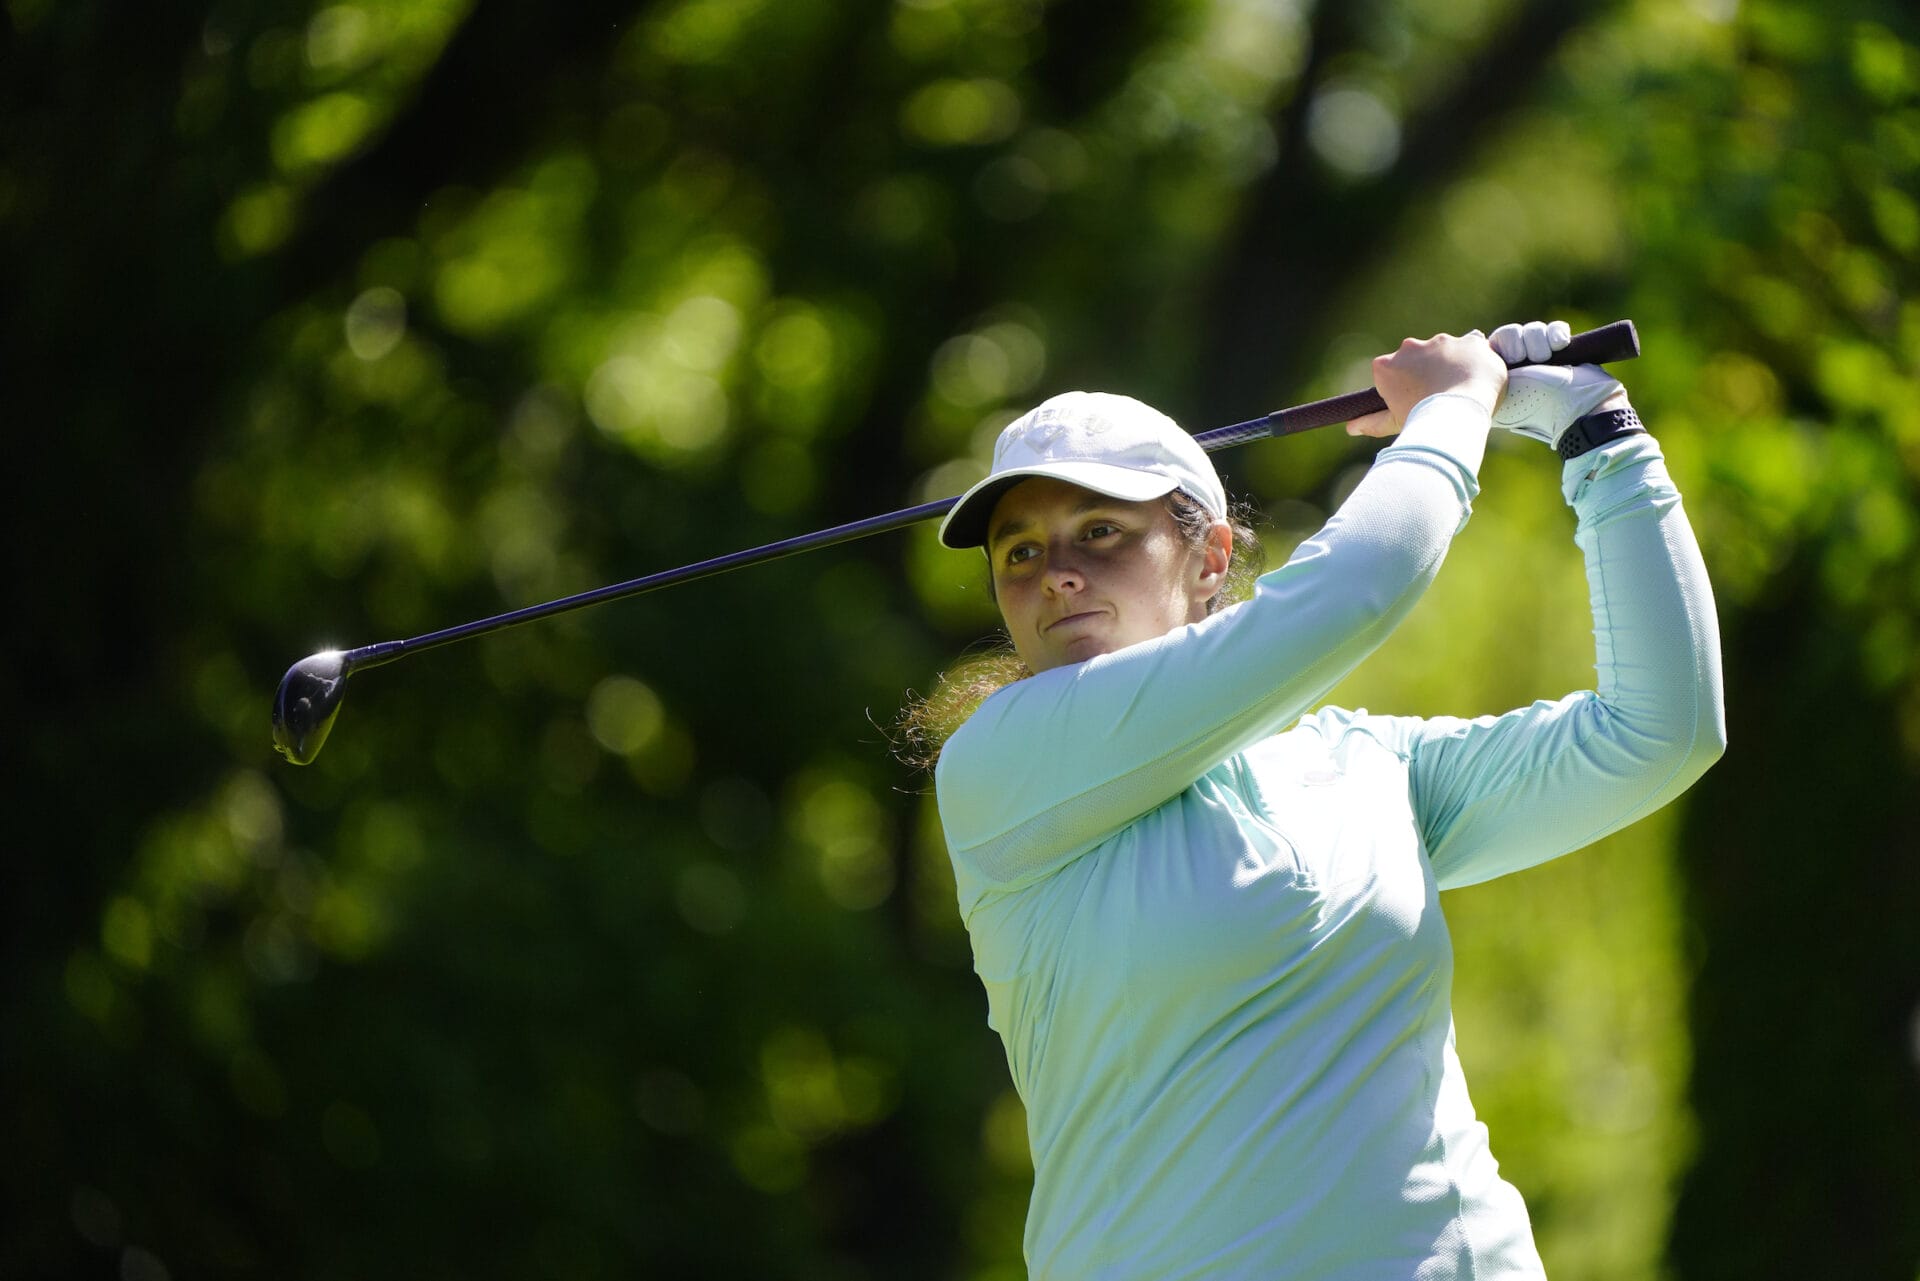 Walsh the leading qualifier in AIG Women’s Close